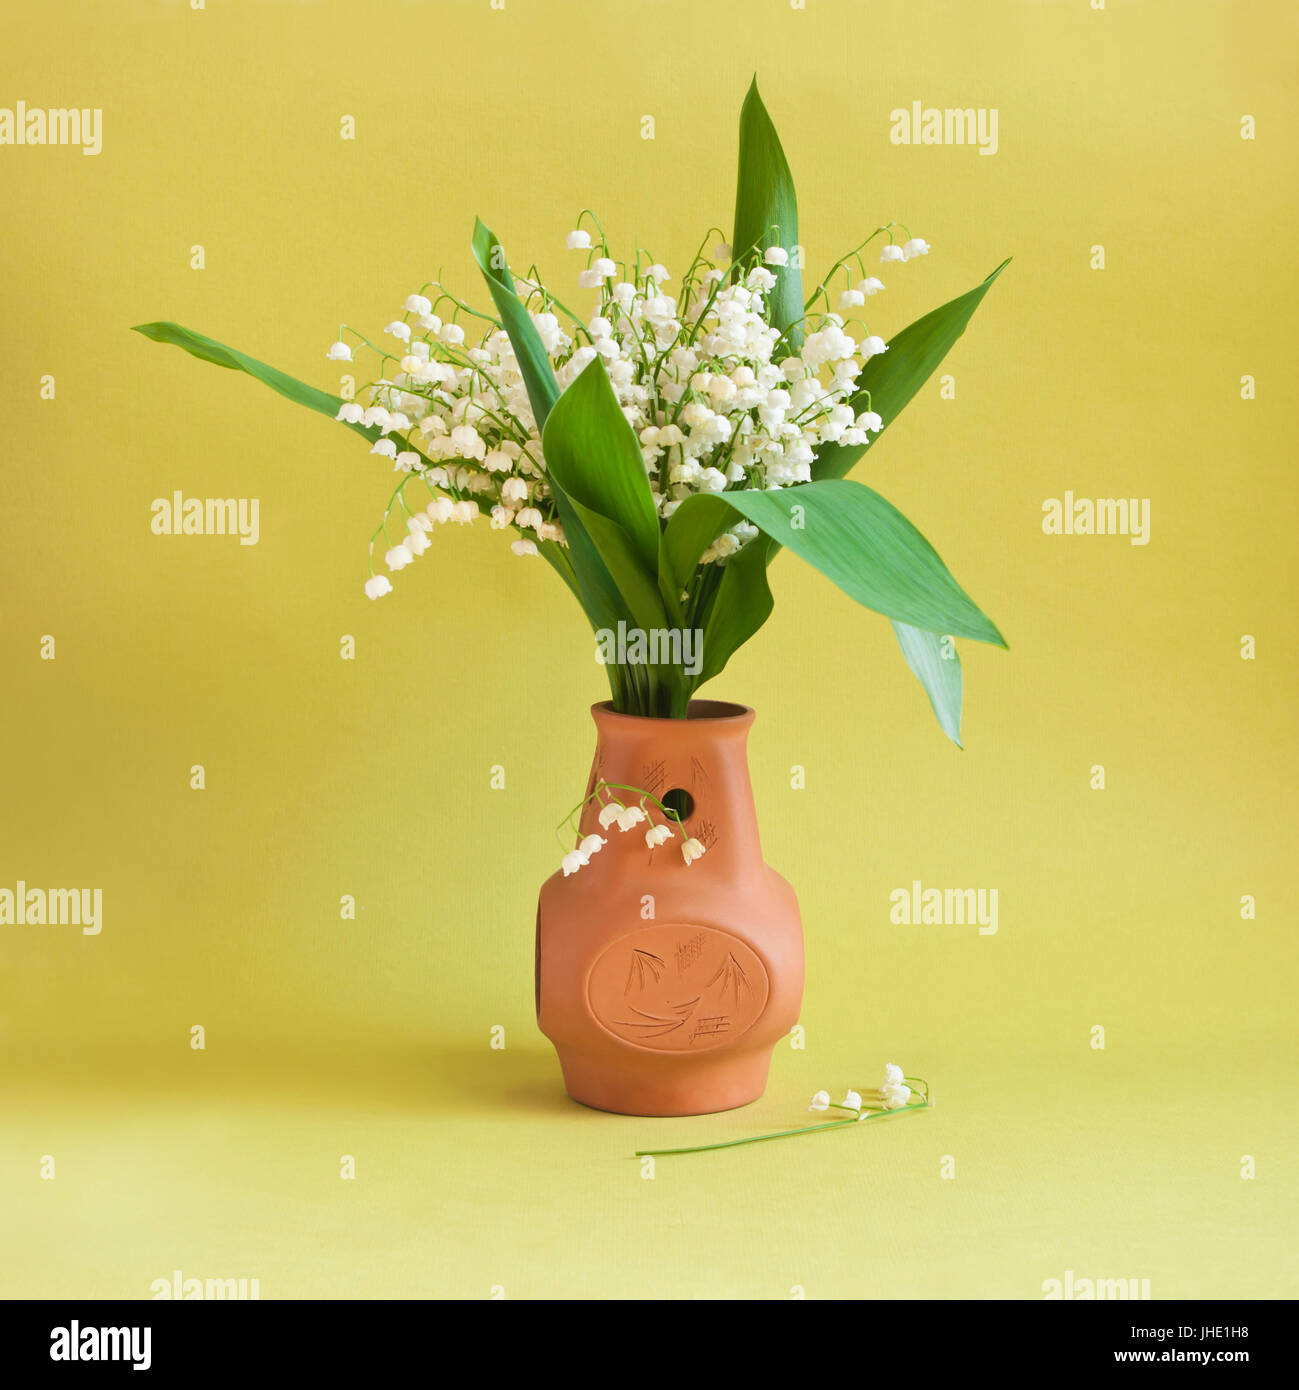 lily-of-the-valley in clay vase on yellow background Stock Photo